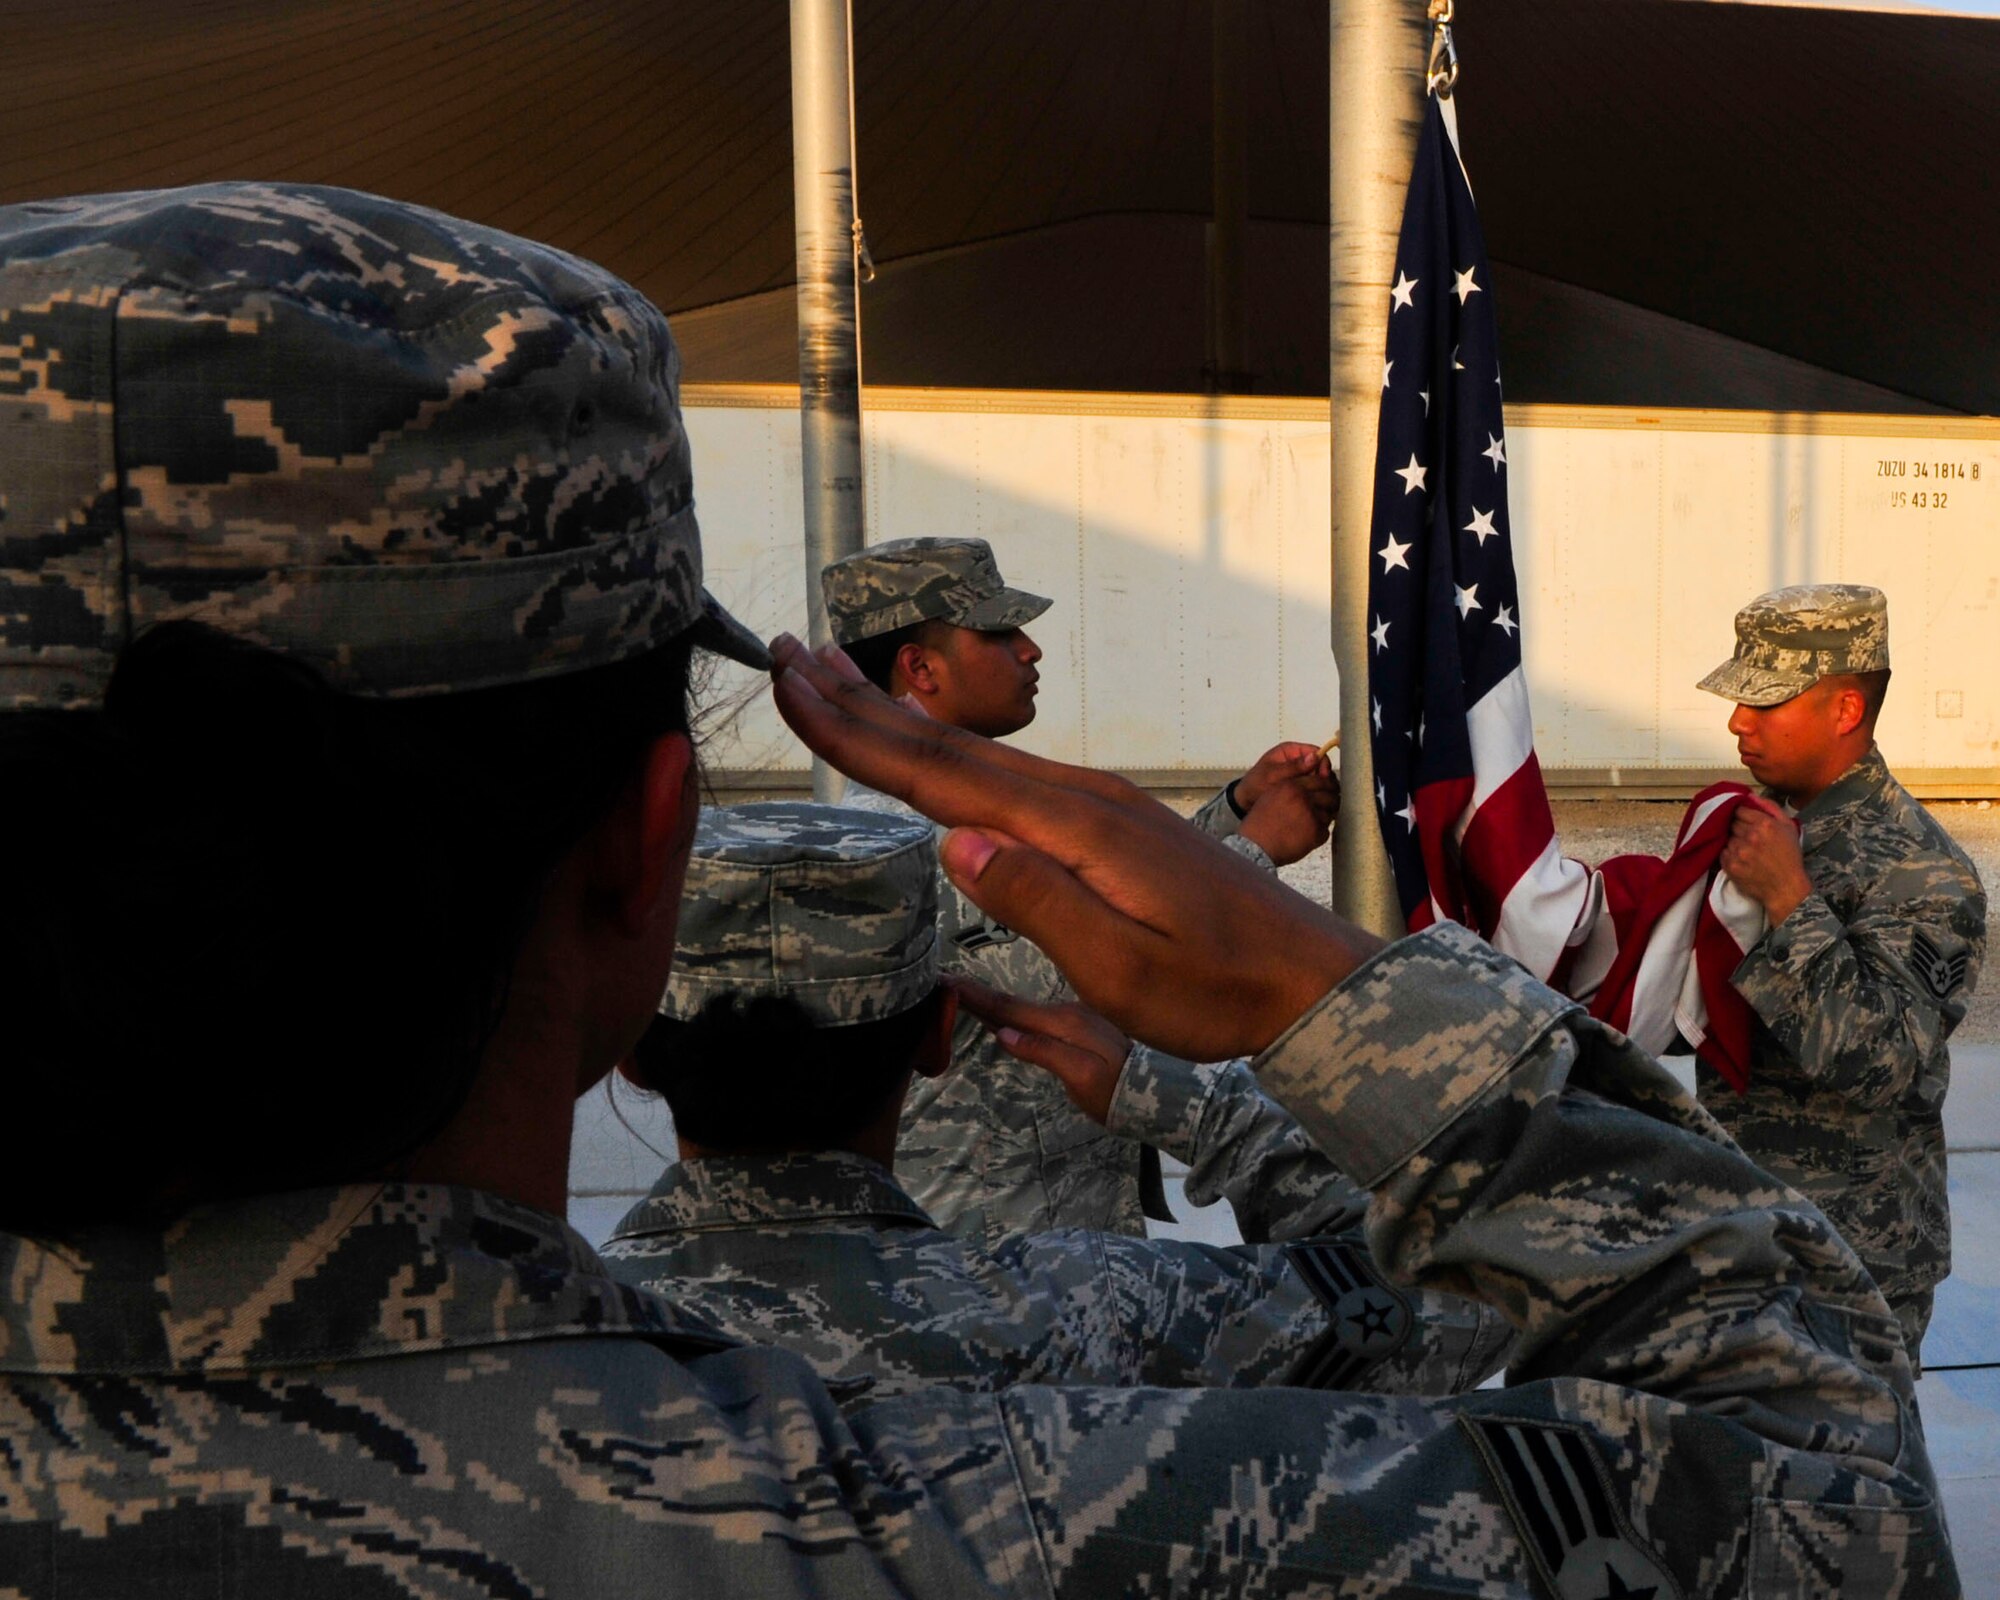 U.S. Air Force Airmen stand in formation during a retreat ceremony recognizing the thirteenth anniversary of the Sept. 11, 2001, at Al Udeid Air Base, Qatar, Sept. 11, 2014.The retreat ceremony signals the end of the official duty day and serves as a ceremony for paying respect to the flag. In this ceremony, respect was paid to the flag and the memory of those lost on Sept. 11, 2001. (U.S. Air Force photo by Senior Airman Colin Cates)  